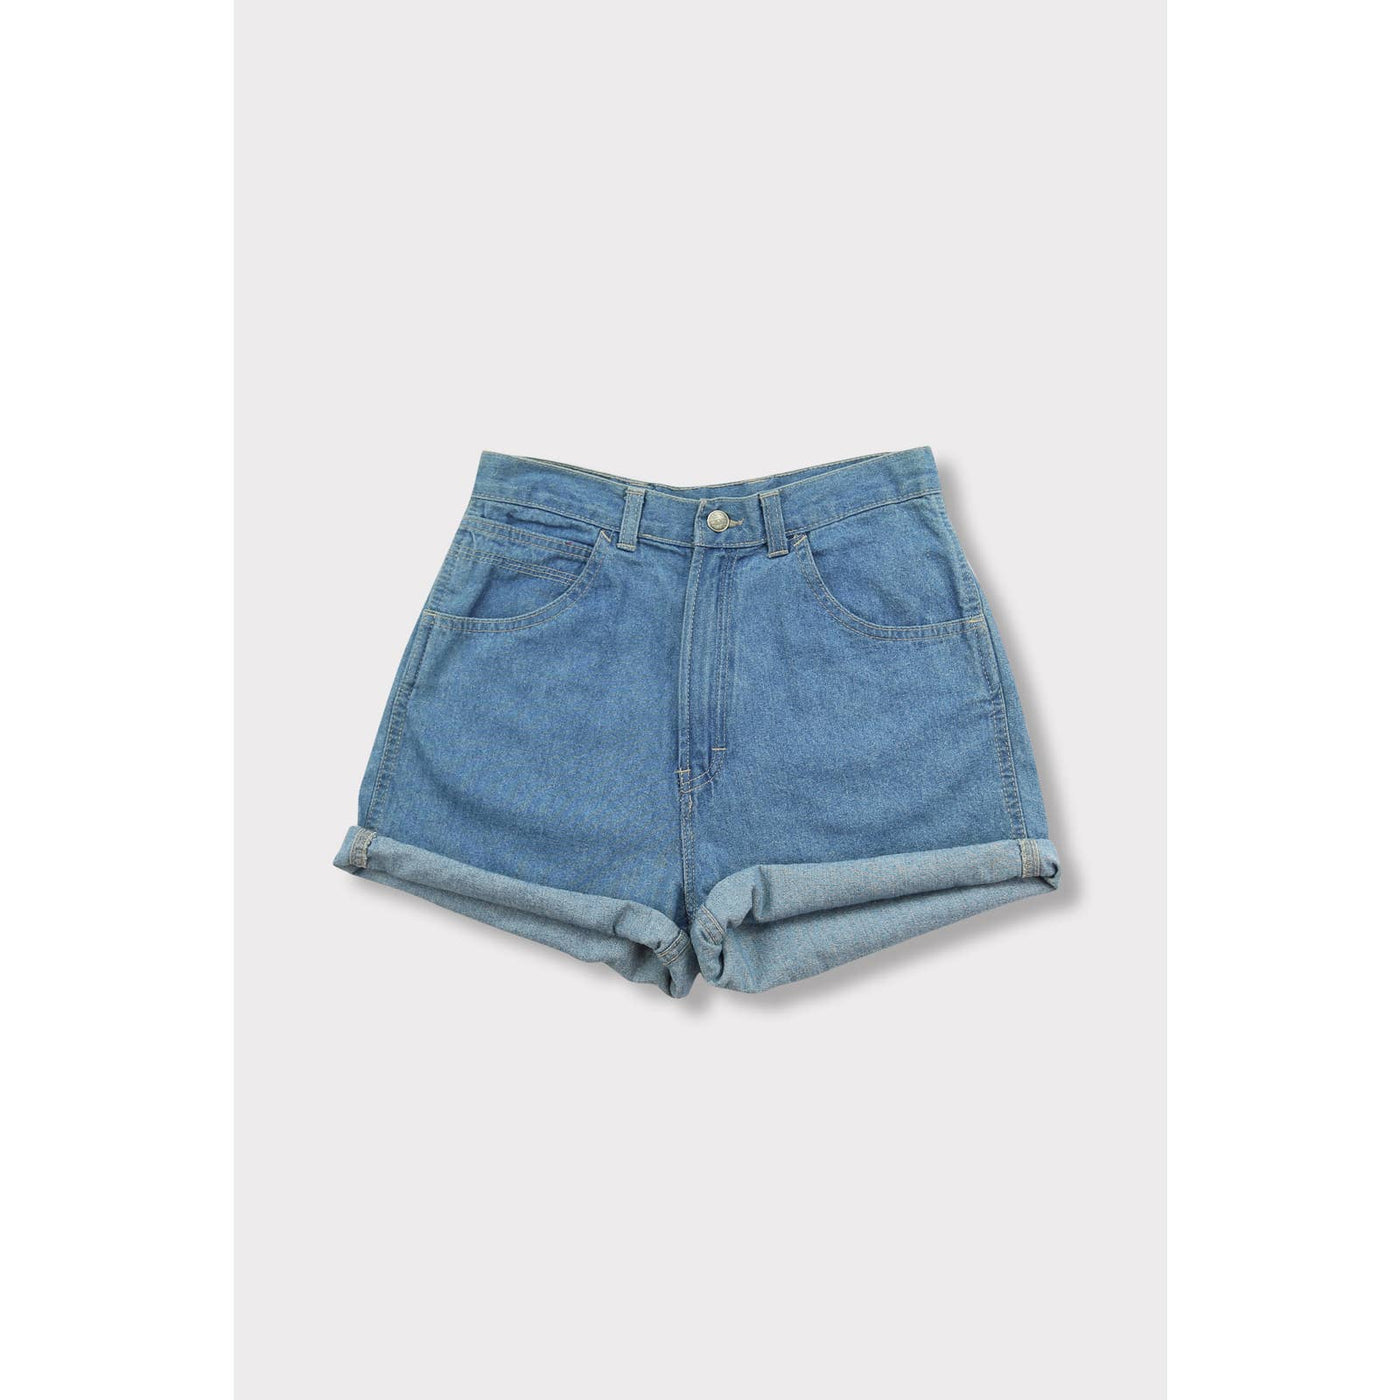 Vintage 90s High Waisted Cuffed Shorts